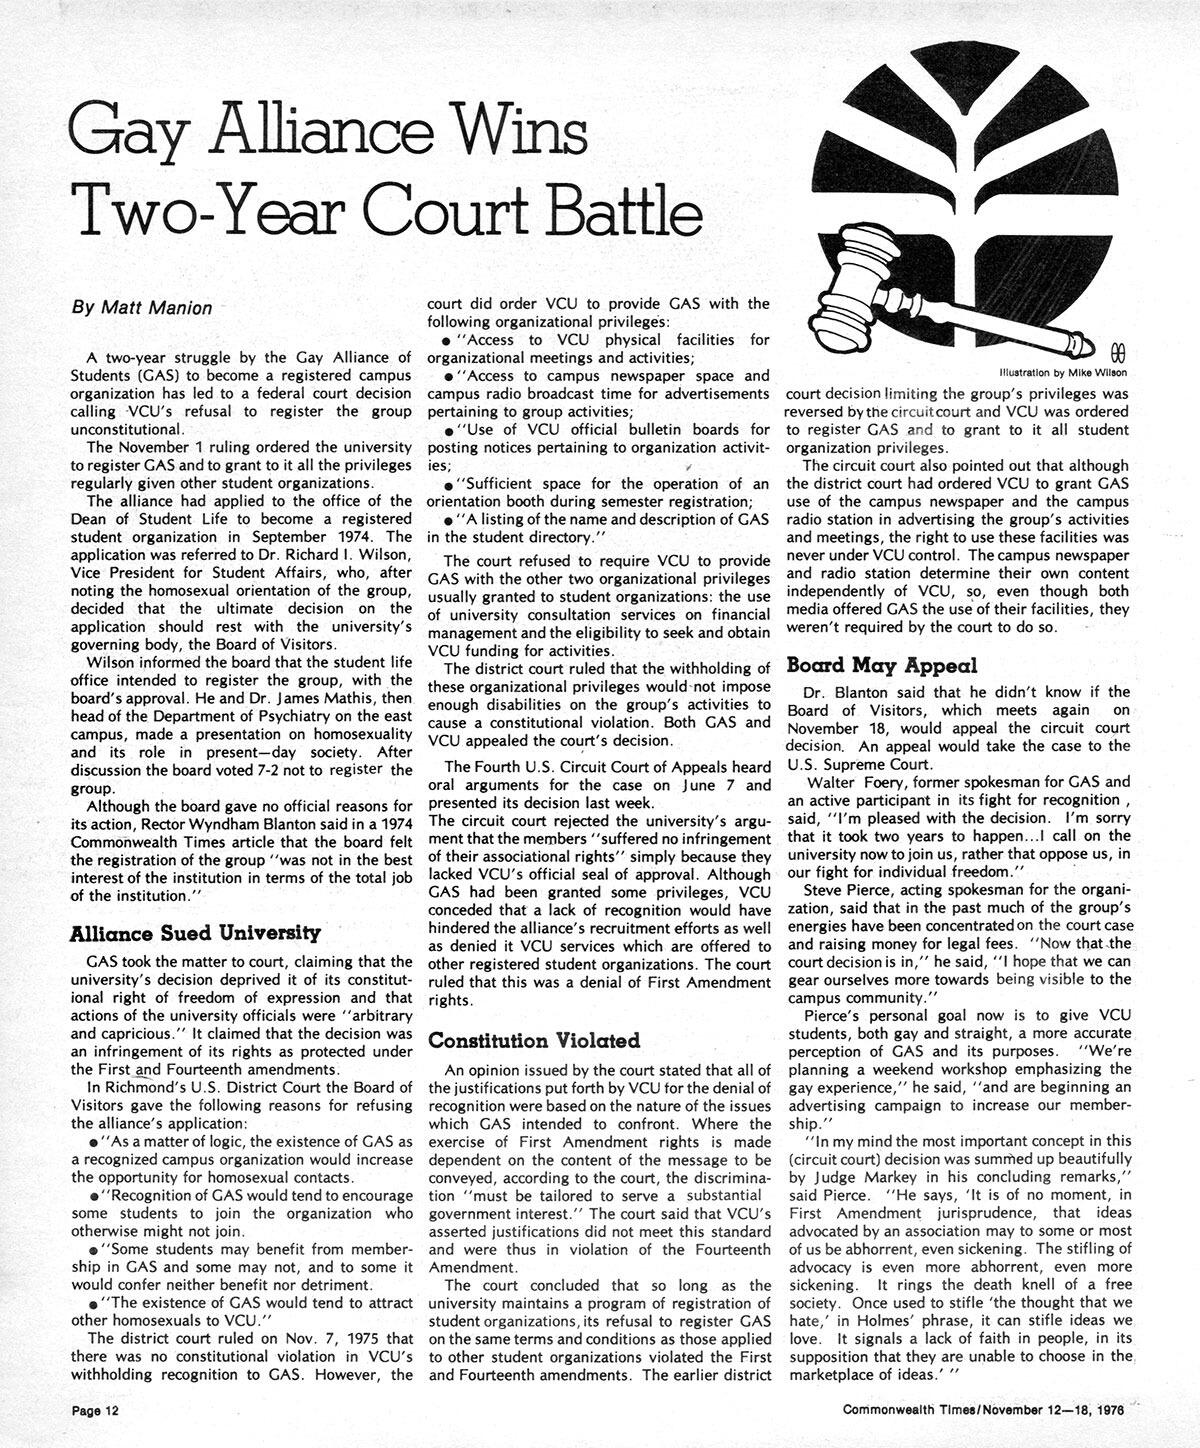 “Gay Alliance Wins Two-Year Court Battle”
<br>The Commonwealth Times, Nov. 12-18, 1976
<br>Source: VCU Libraries' Commonwealth Times Digital Collection